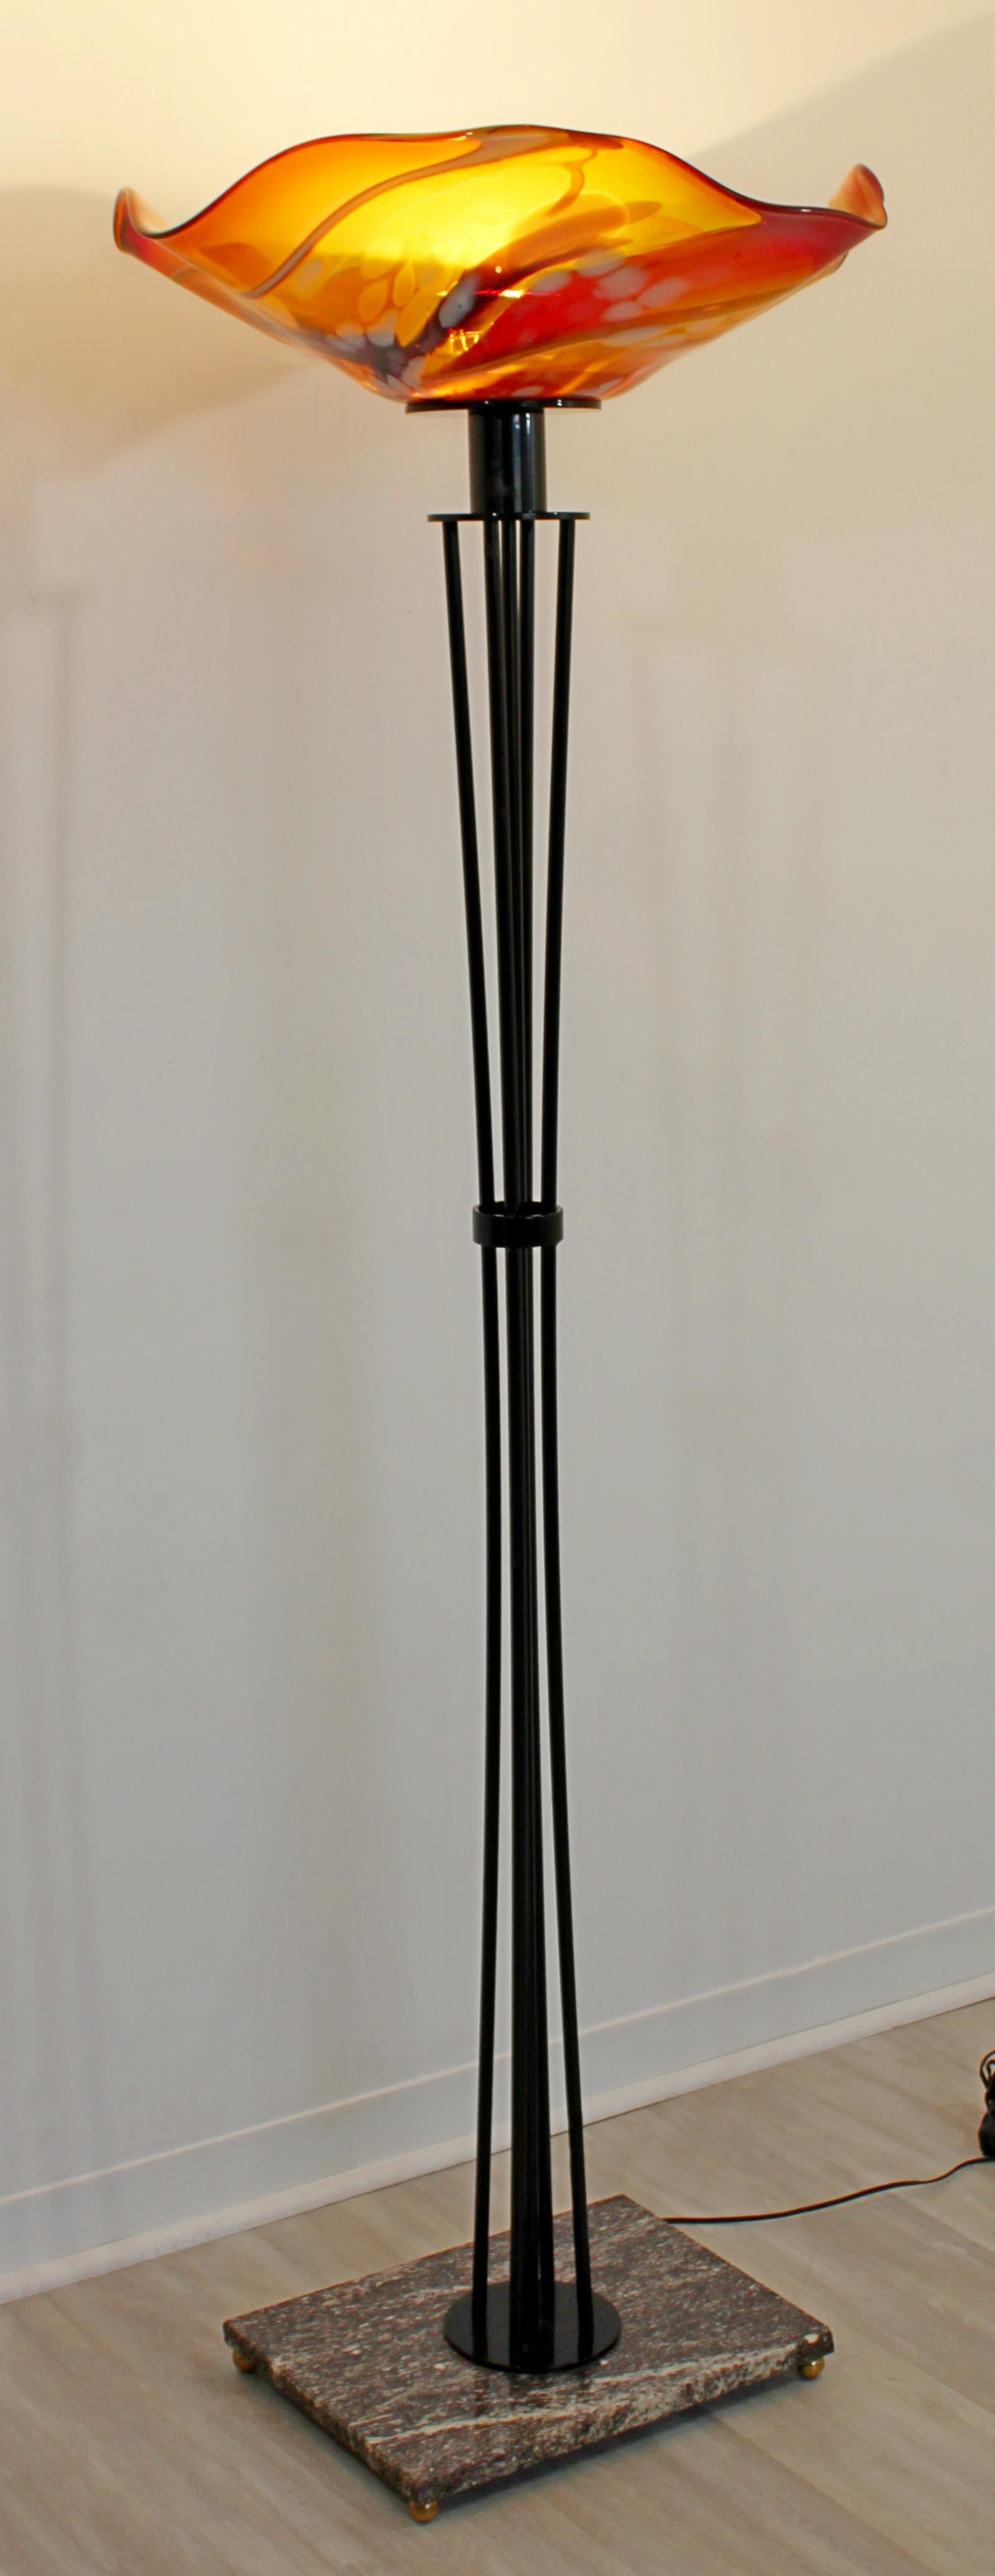 For your consideration is a stunningly beautiful, wrought iron and orange blown glass floor lamp on a marble base. In excellent condition. The dimensions are 26